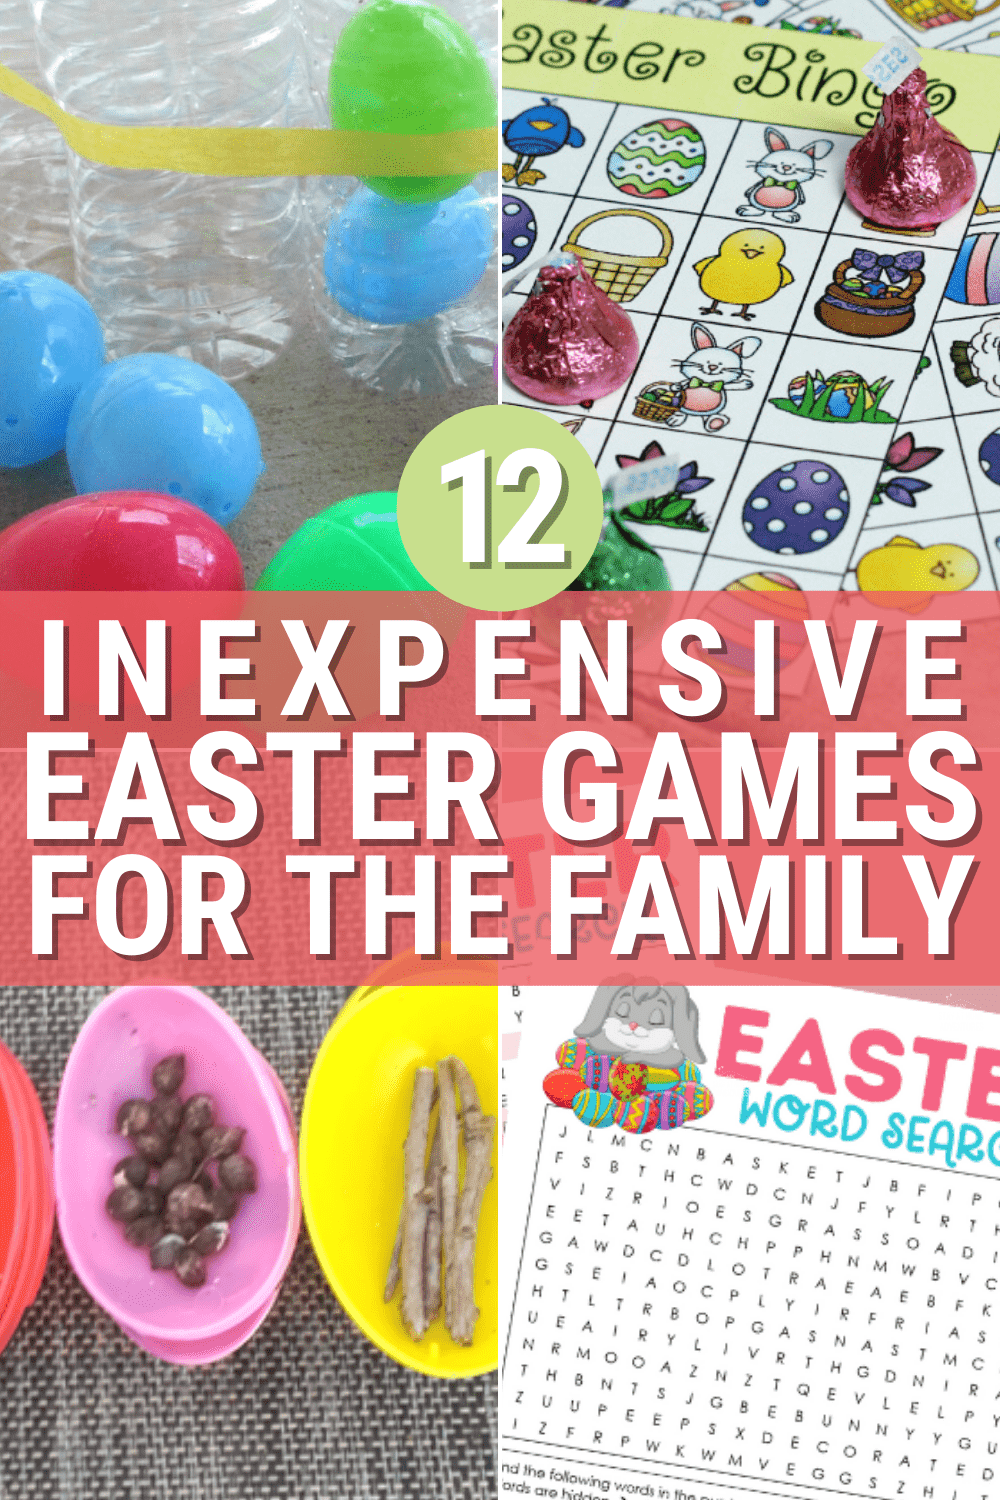 Check out these inexpensive games for the entire family from toddlers to adults, your family will enjoy this affordable games this Easter! via @mystayathome